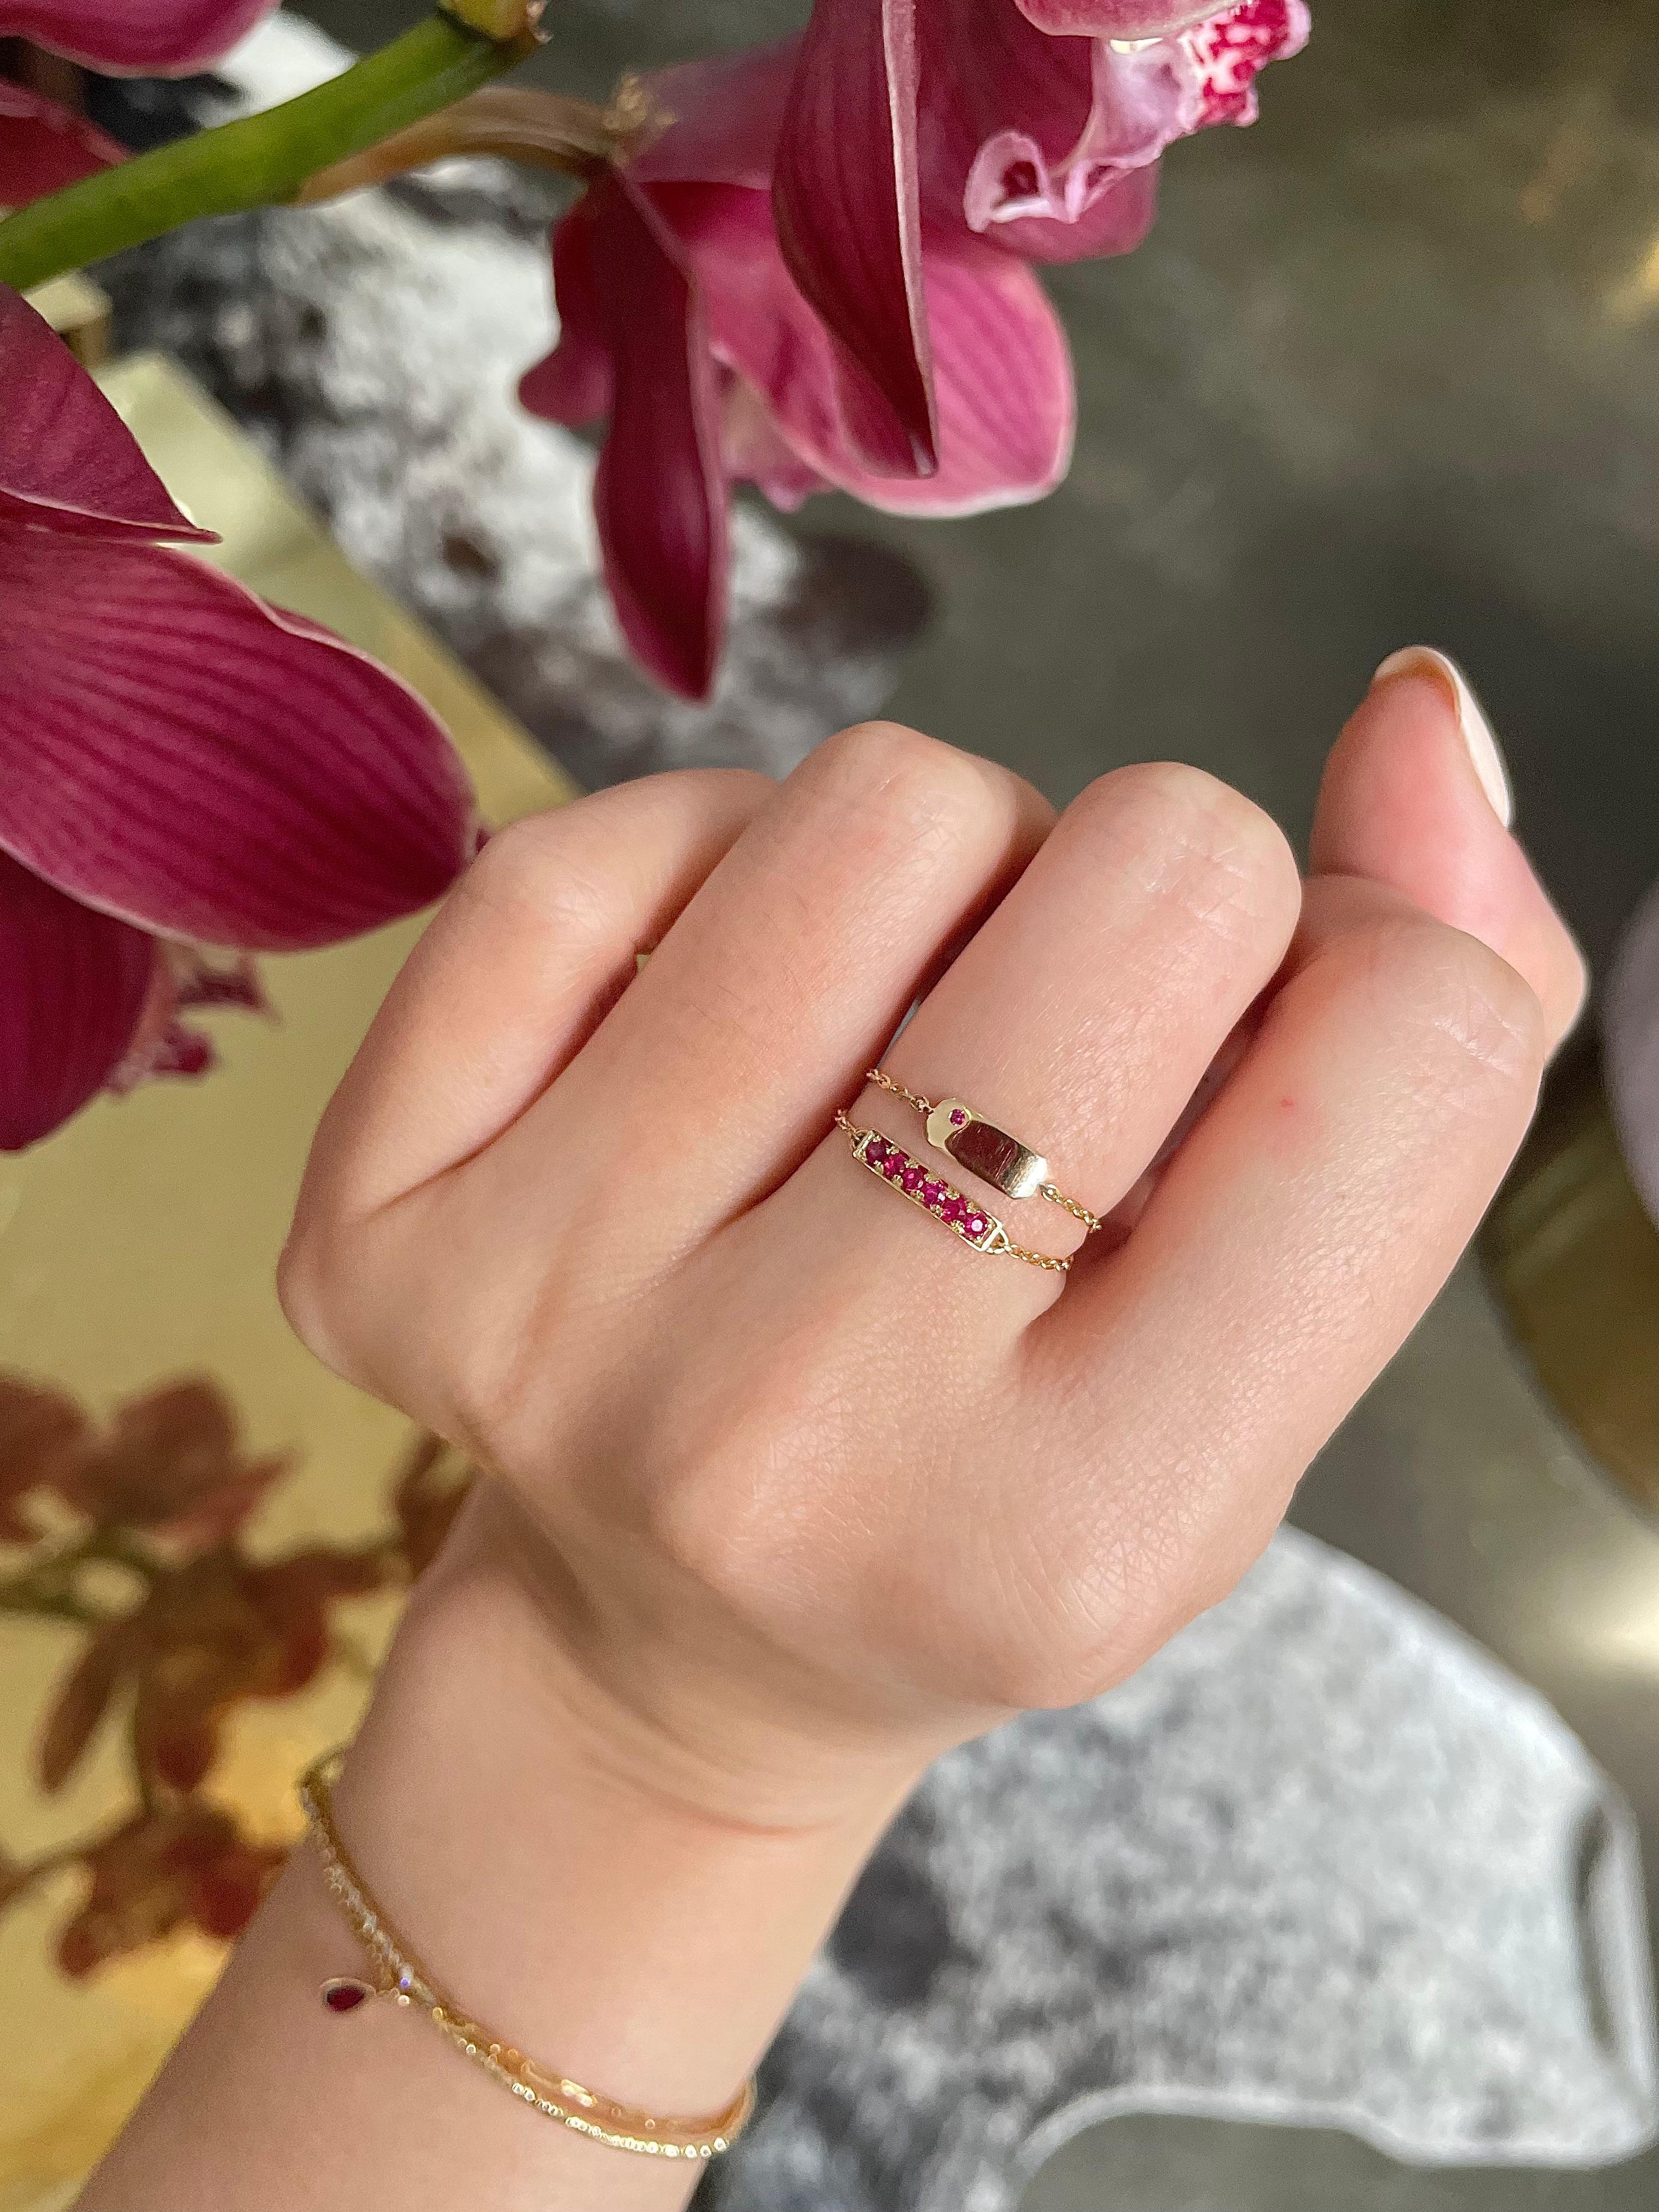 We created this little bar of gems to be a lucky charm for everyday. Originally made for a lunar new year good luck charm for a client, it has soon become one of our everyday classics. Encrusted in this 14k bar are six spectacular rubies. Six is a